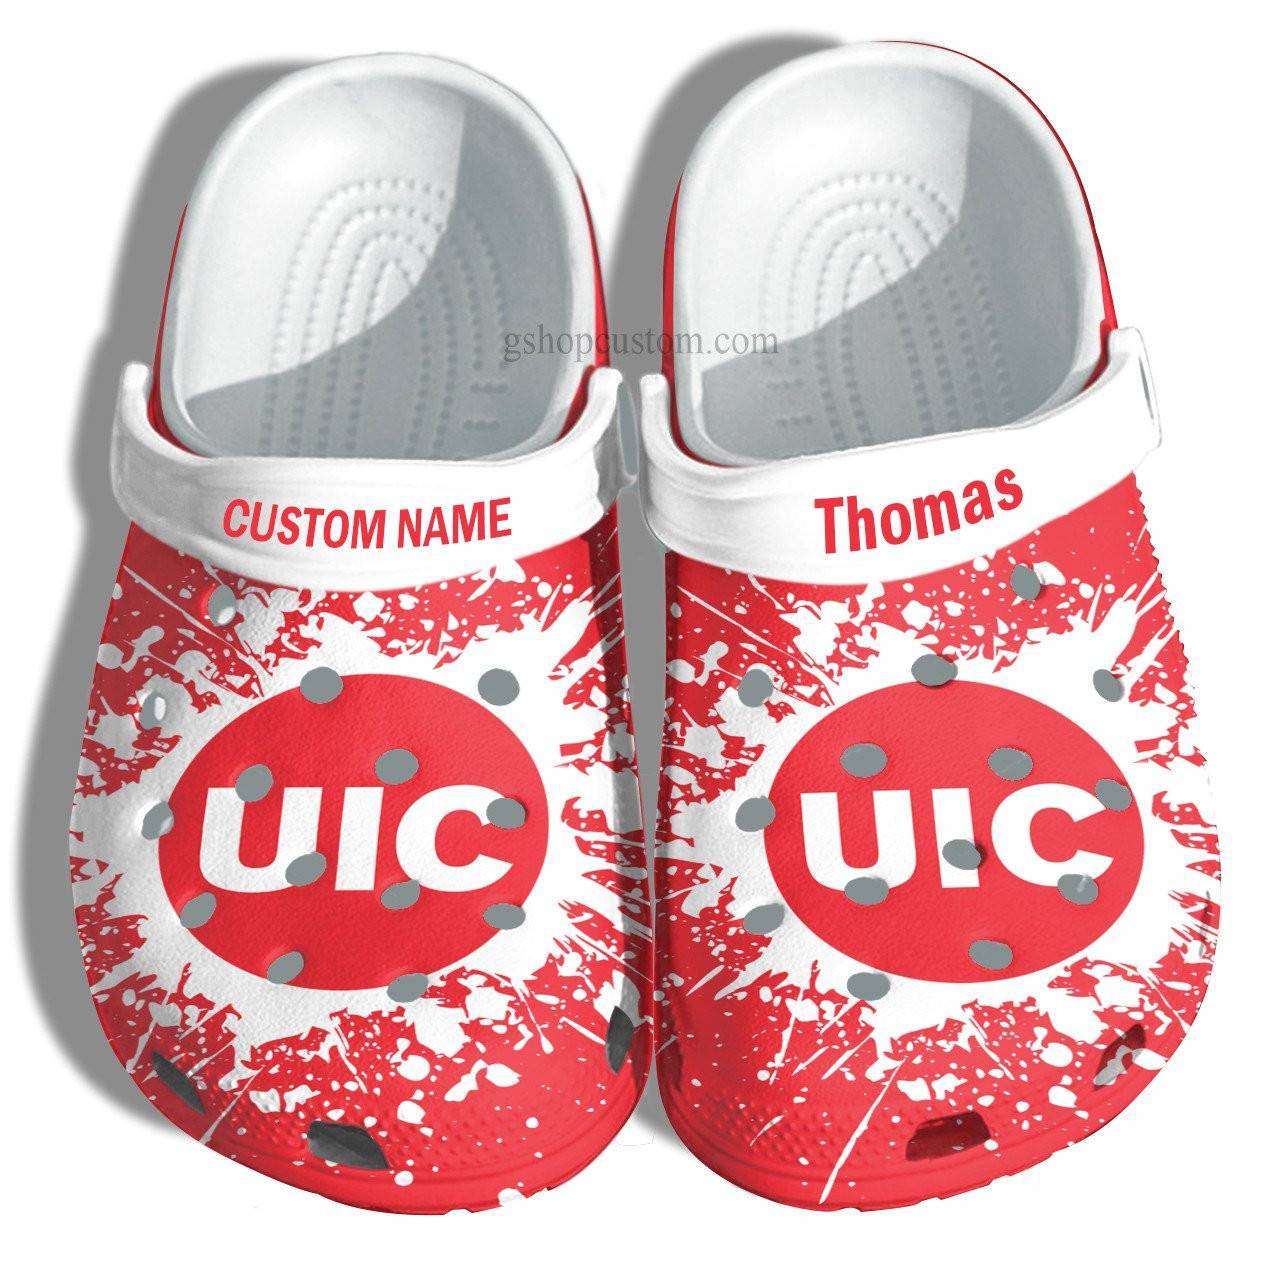 University Of Illinois At Chicago Graduation Gifts Croc Shoes Customize – Admission Gift Crocss Shoes